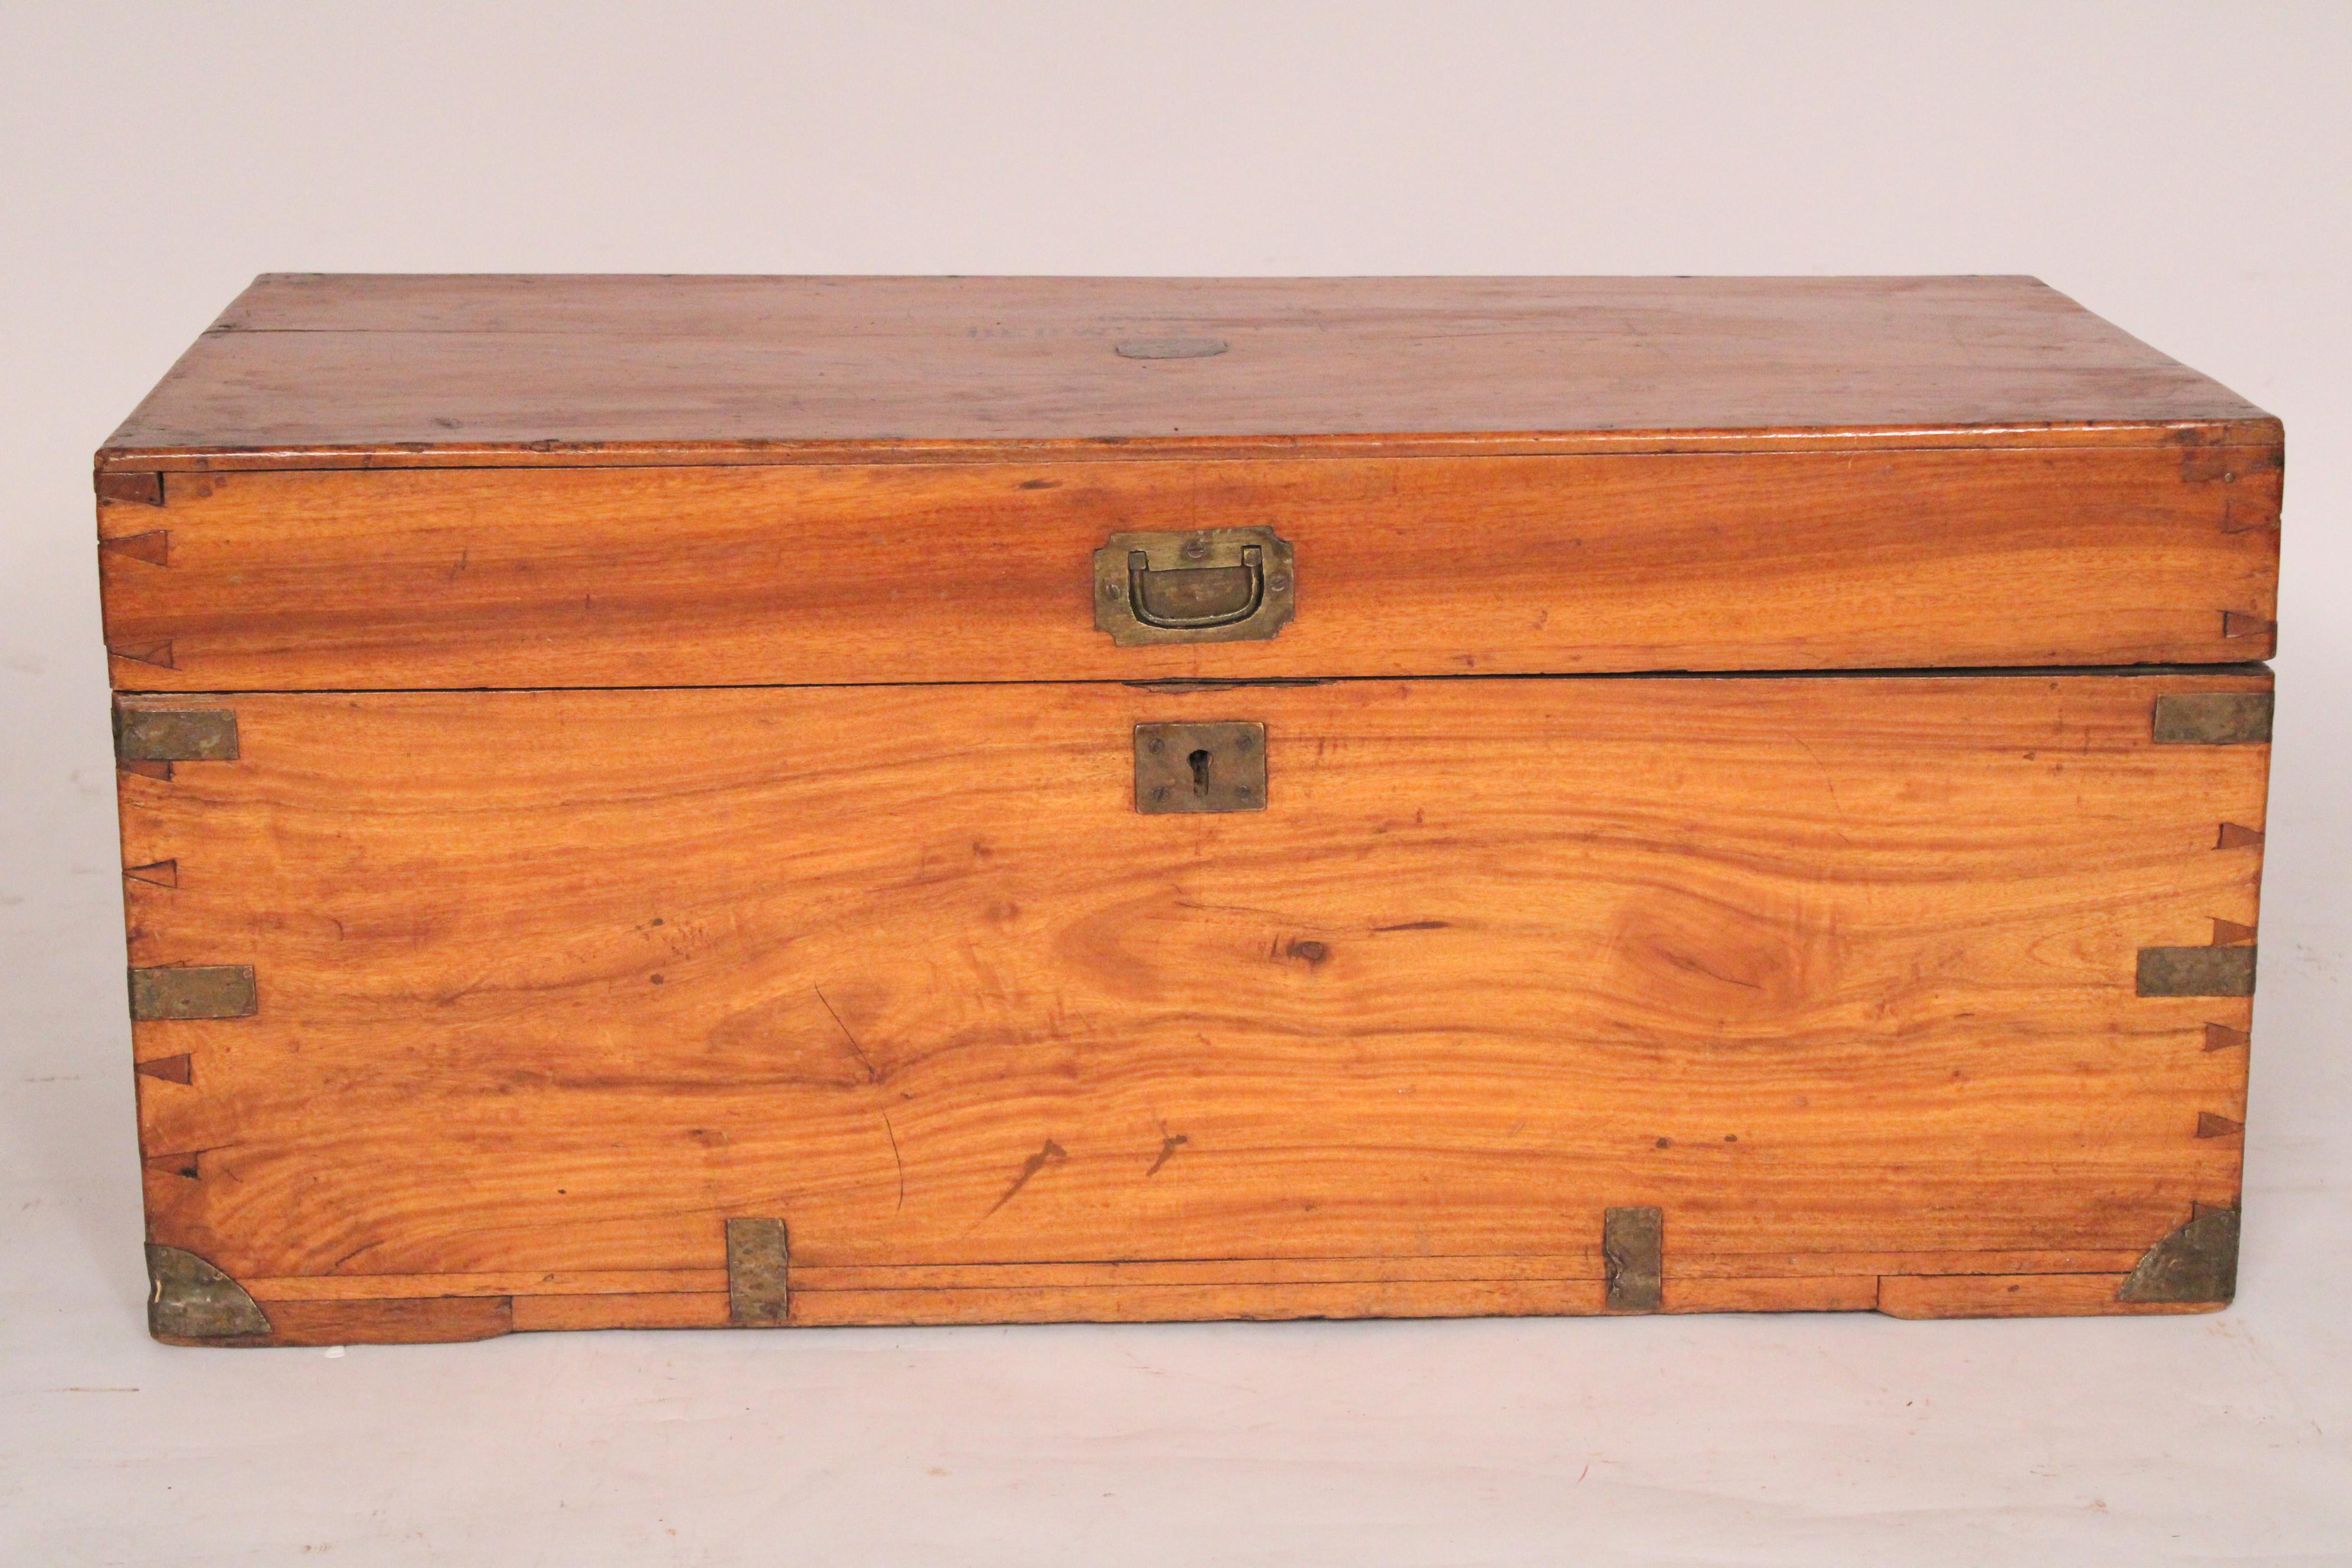 English made campaign style camphor wood trunk with campaign style brass mounts, circa 1910. With a rectangular top with inscription that reads 